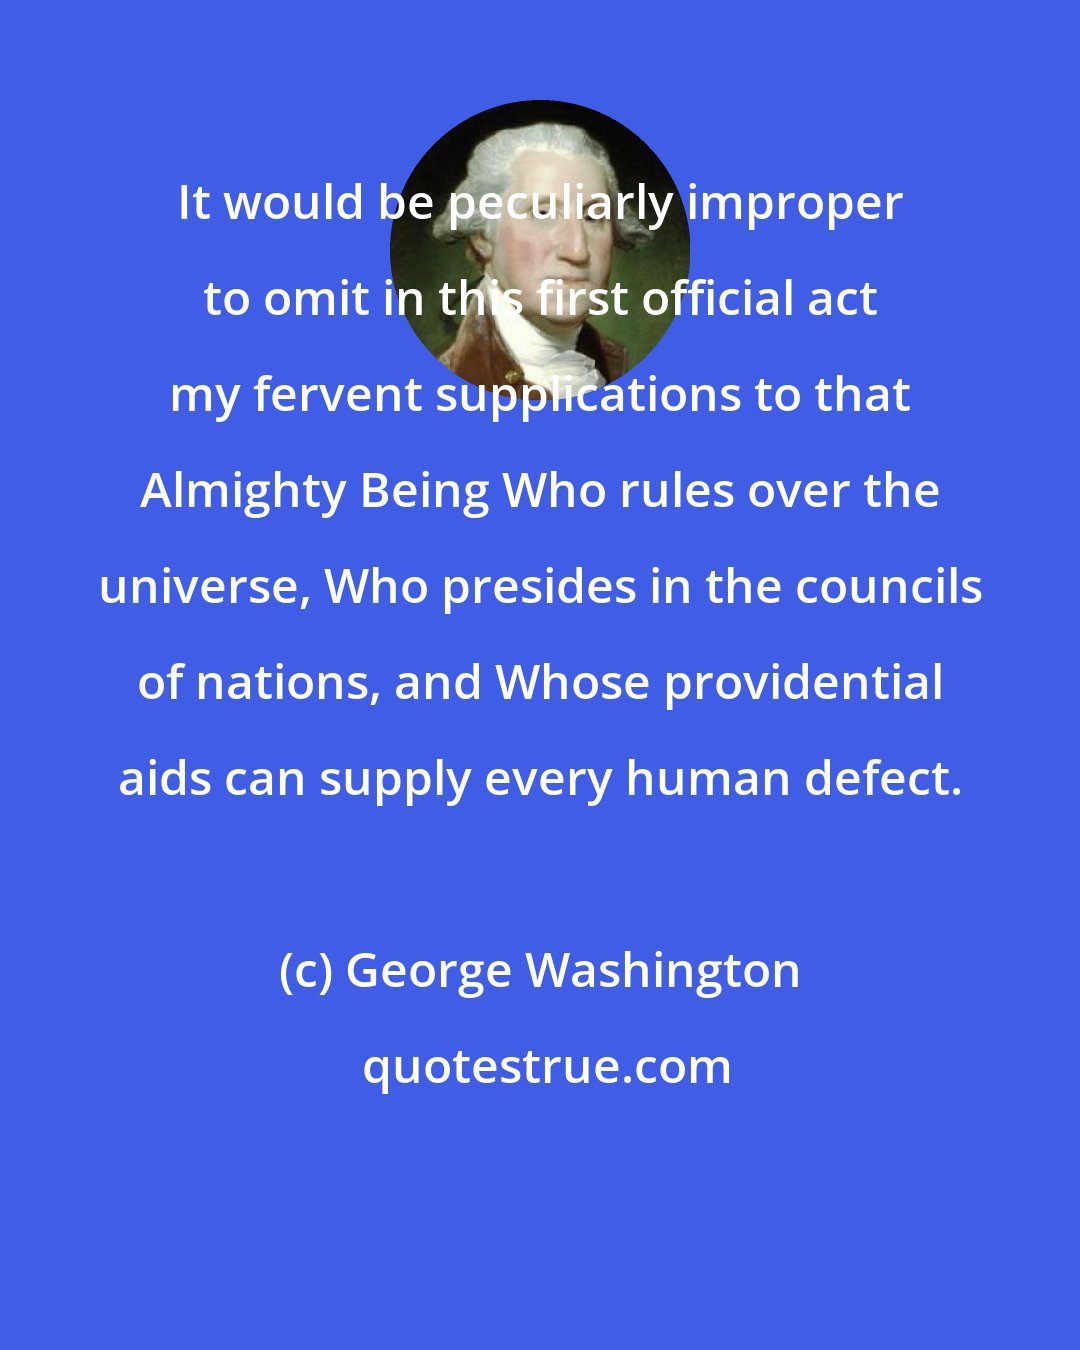 George Washington: It would be peculiarly improper to omit in this first official act my fervent supplications to that Almighty Being Who rules over the universe, Who presides in the councils of nations, and Whose providential aids can supply every human defect.